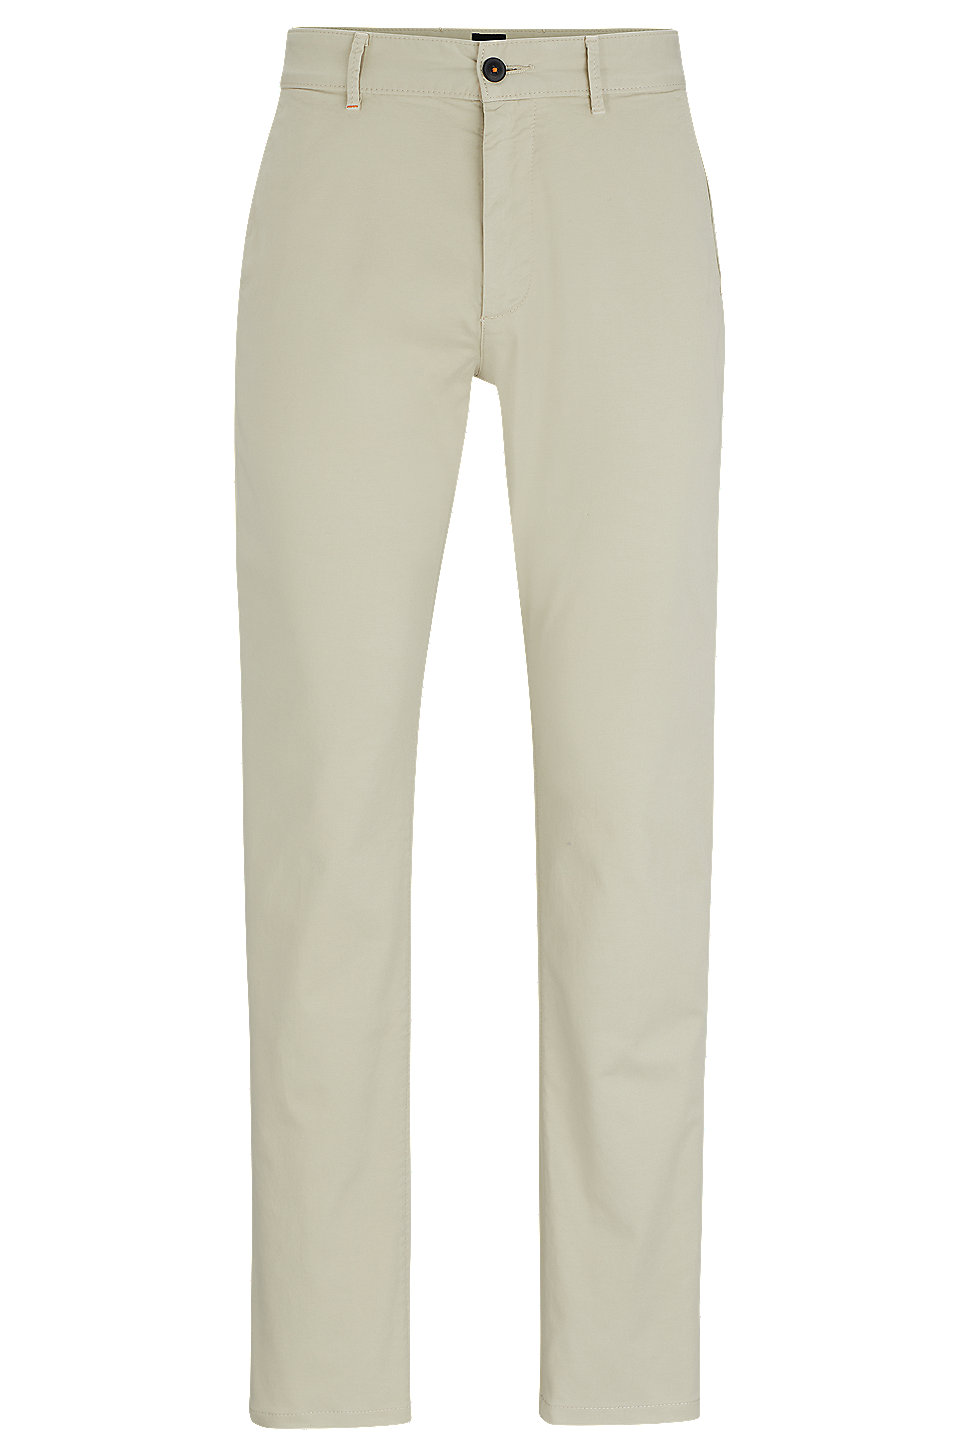 BOSS - Slim-fit chinos in stretch-cotton satin